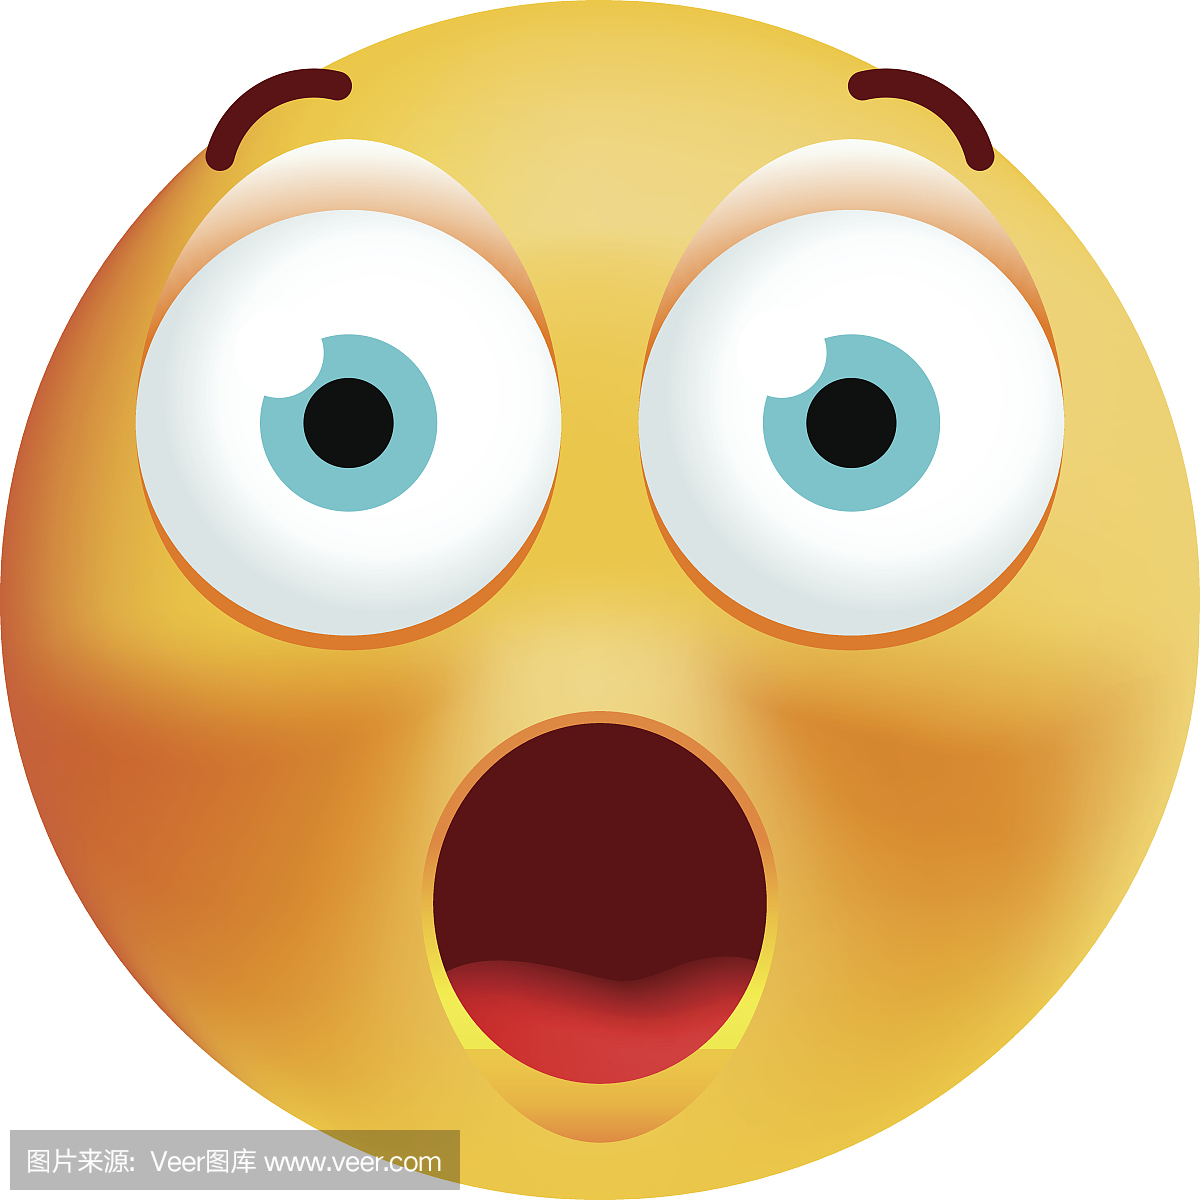 Cute Surprised Emoticon on White Background